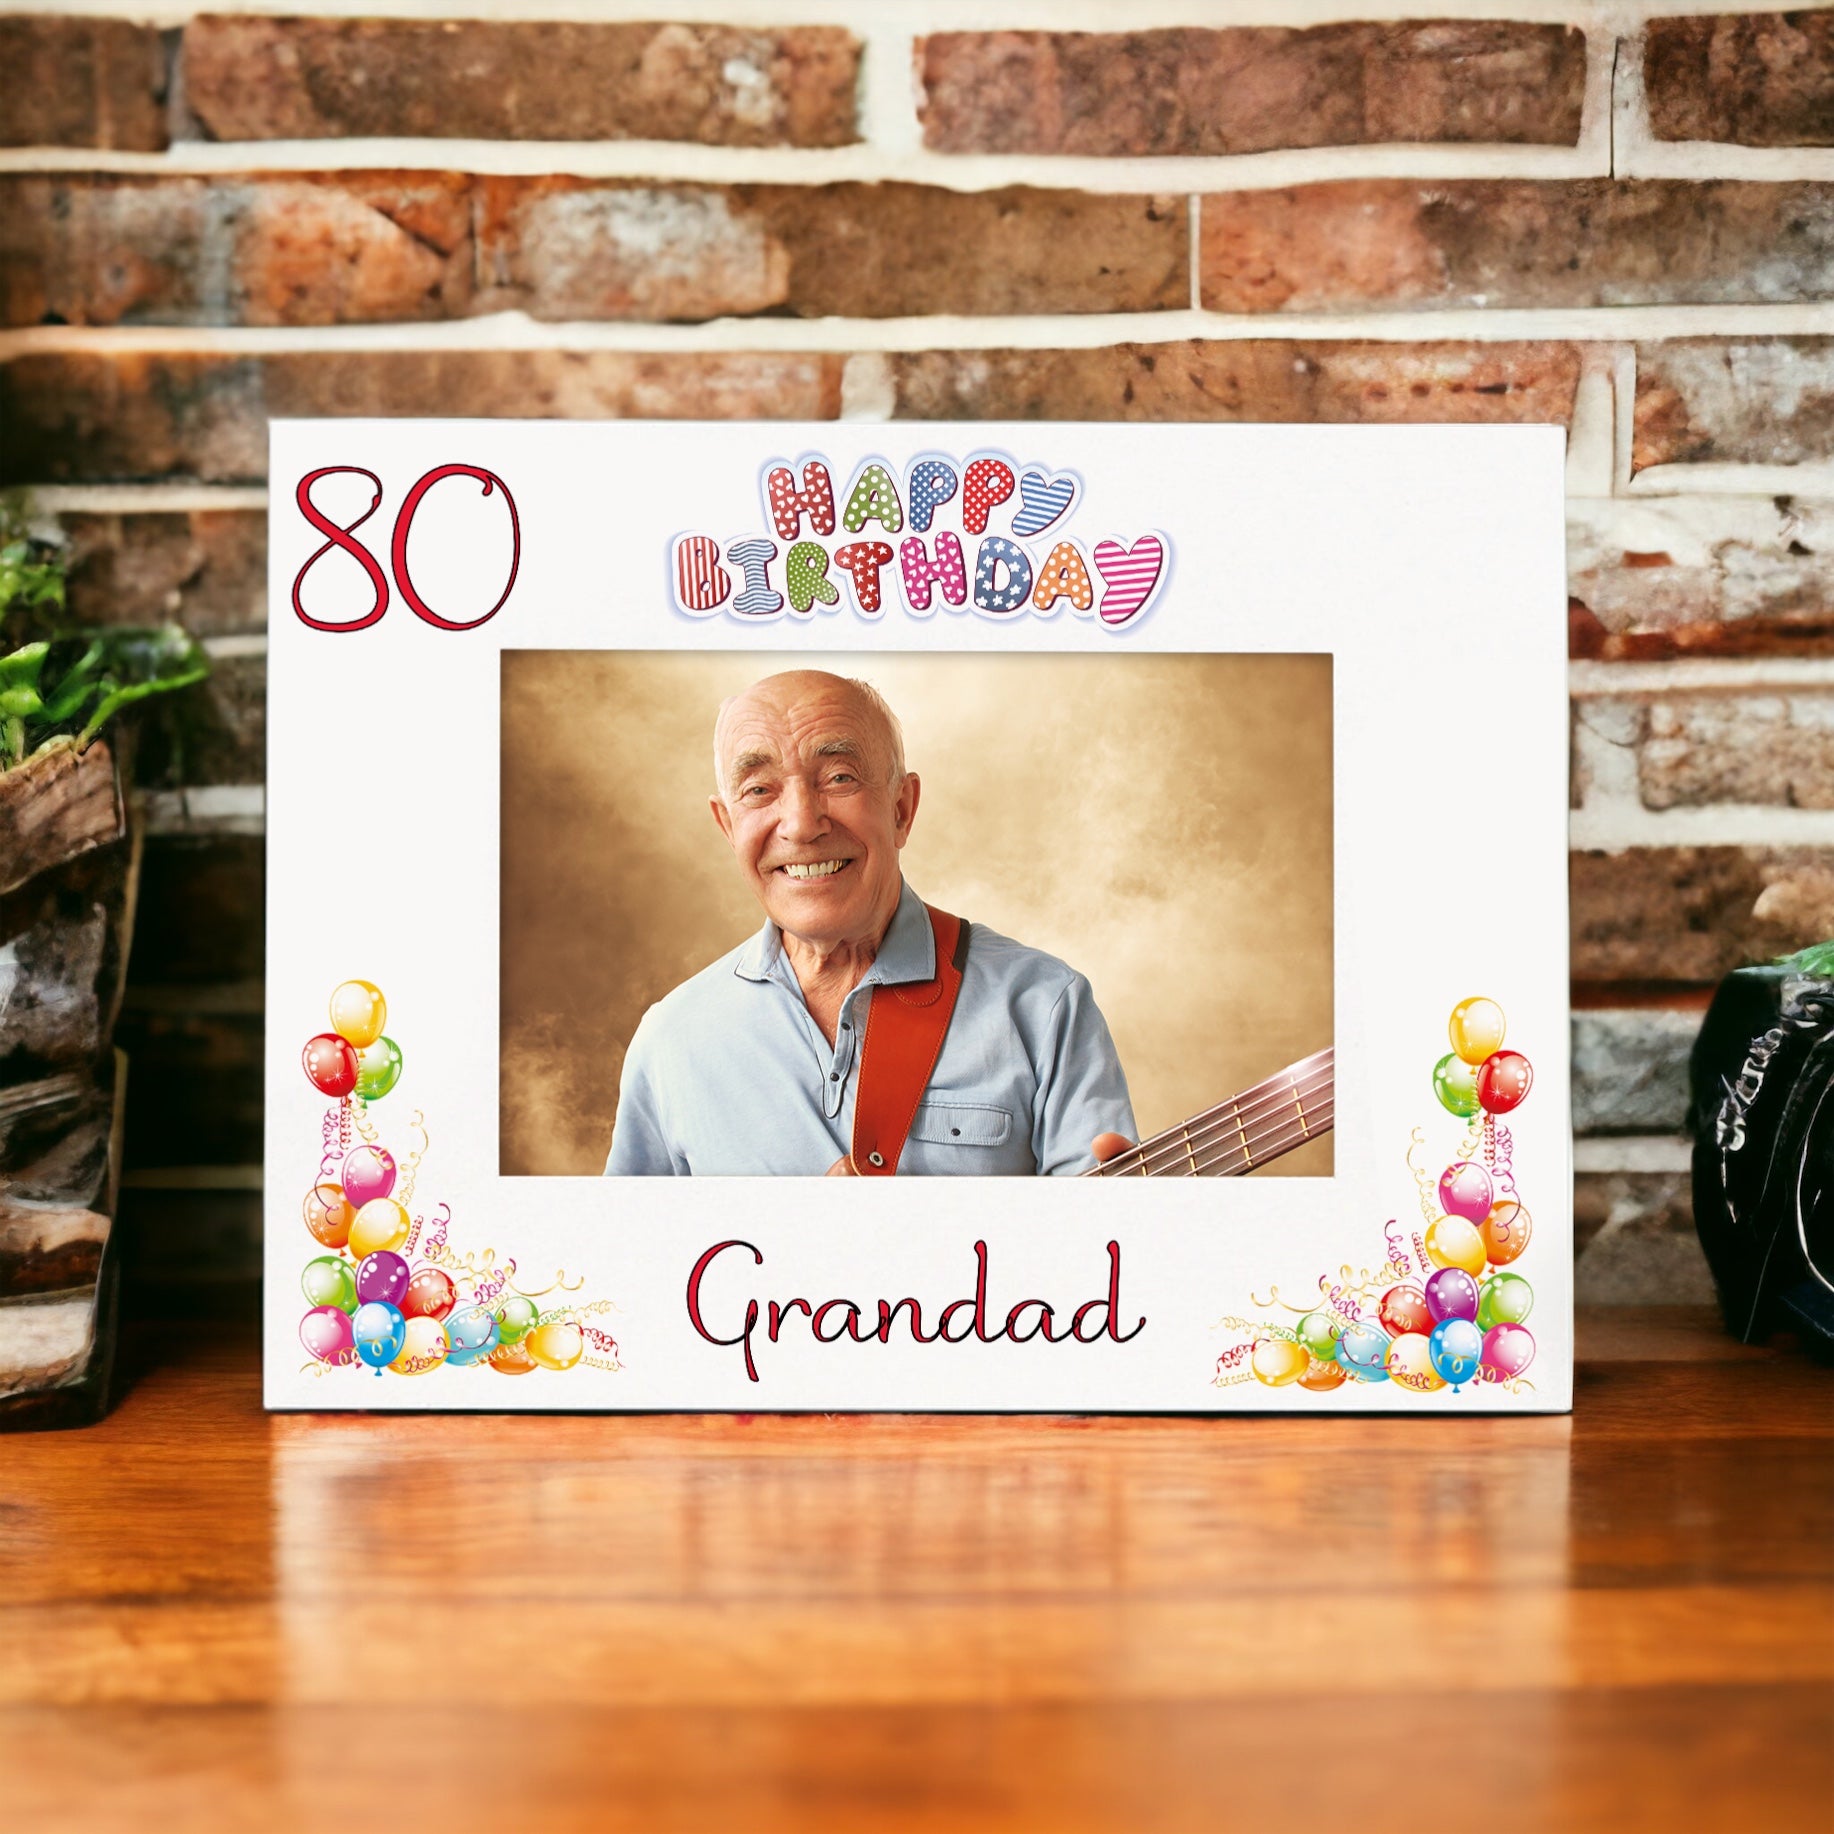 Second Nature '80th Birthday' Pop Up Card | Temptation Gifts